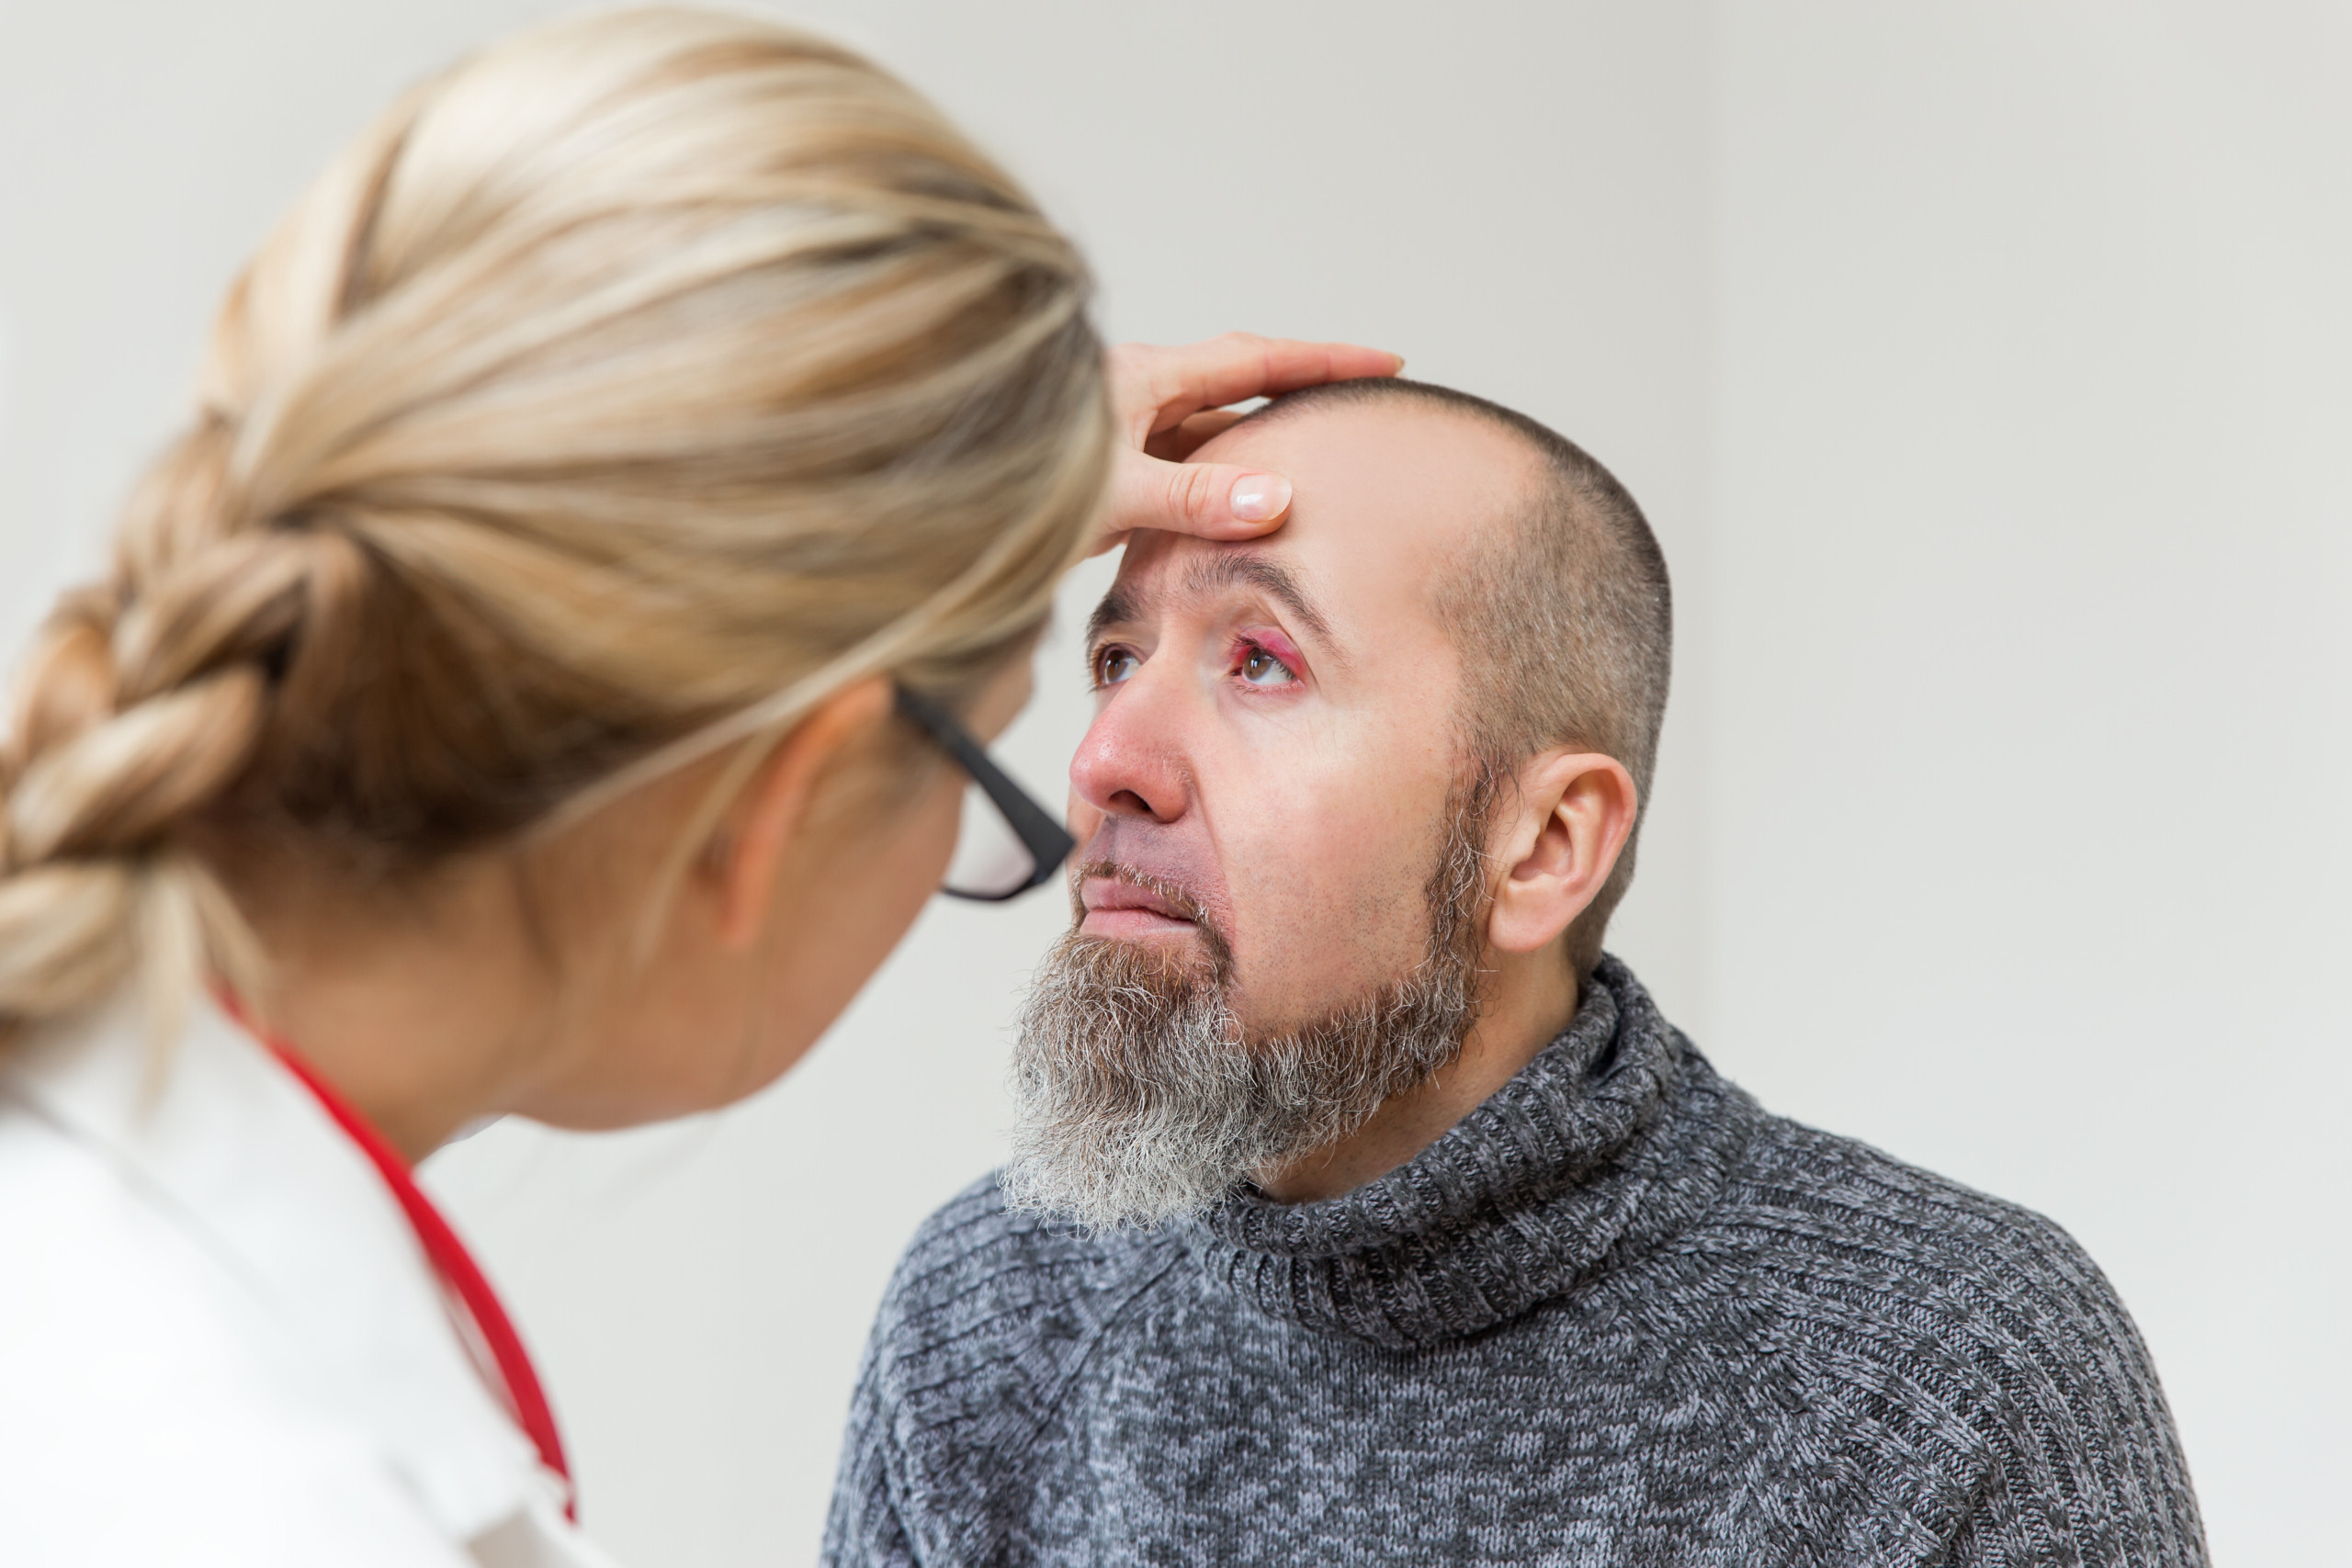 Does MS Cause Long Sustained Eyelid Twitching?